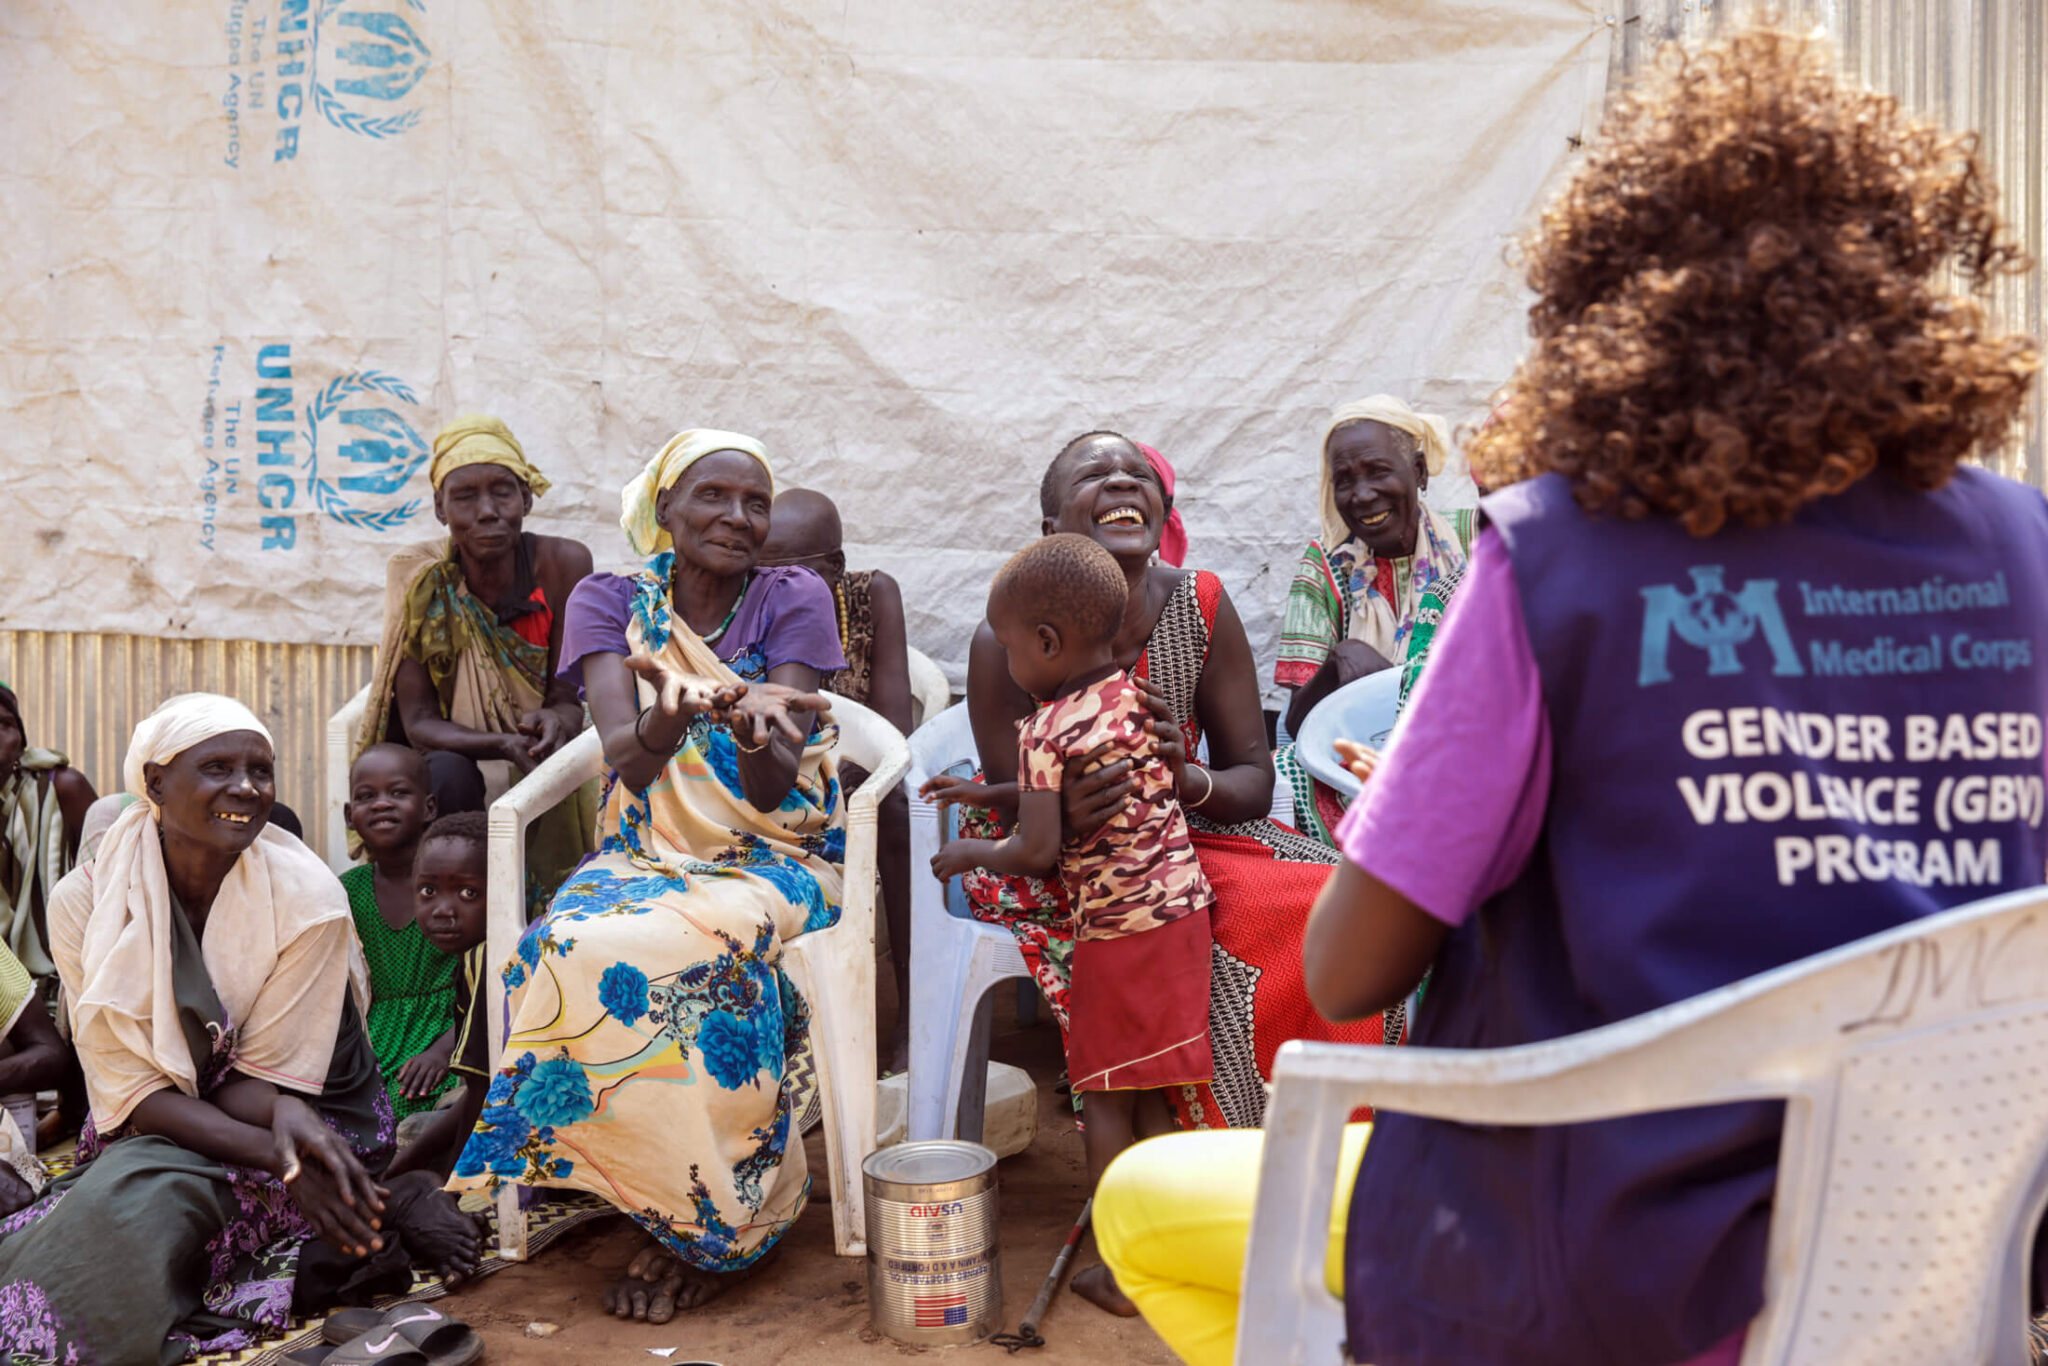 ETH_A-counseling-session-at-Jewi-Refugee-Camps-women-friendly-center-2048x1366